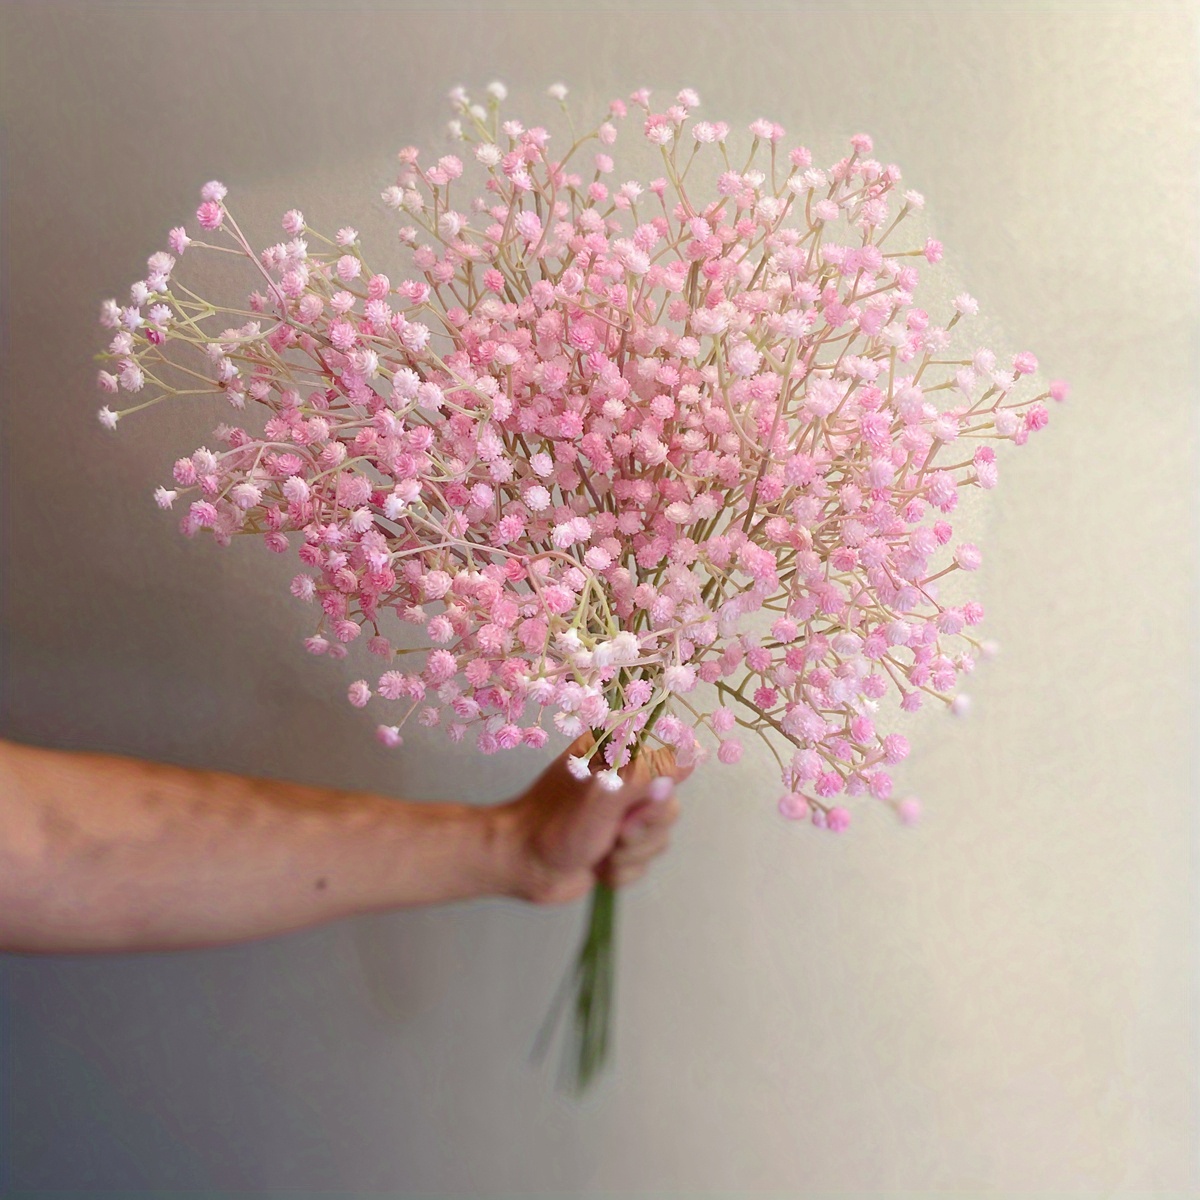 Zukuco Baby Breath Artificial Flowers, Fake Babies Breath Flowers Bush  Gypsophila Silk Real Touch Blooms for Wedding Bridal Party DIY Home  Arrangement